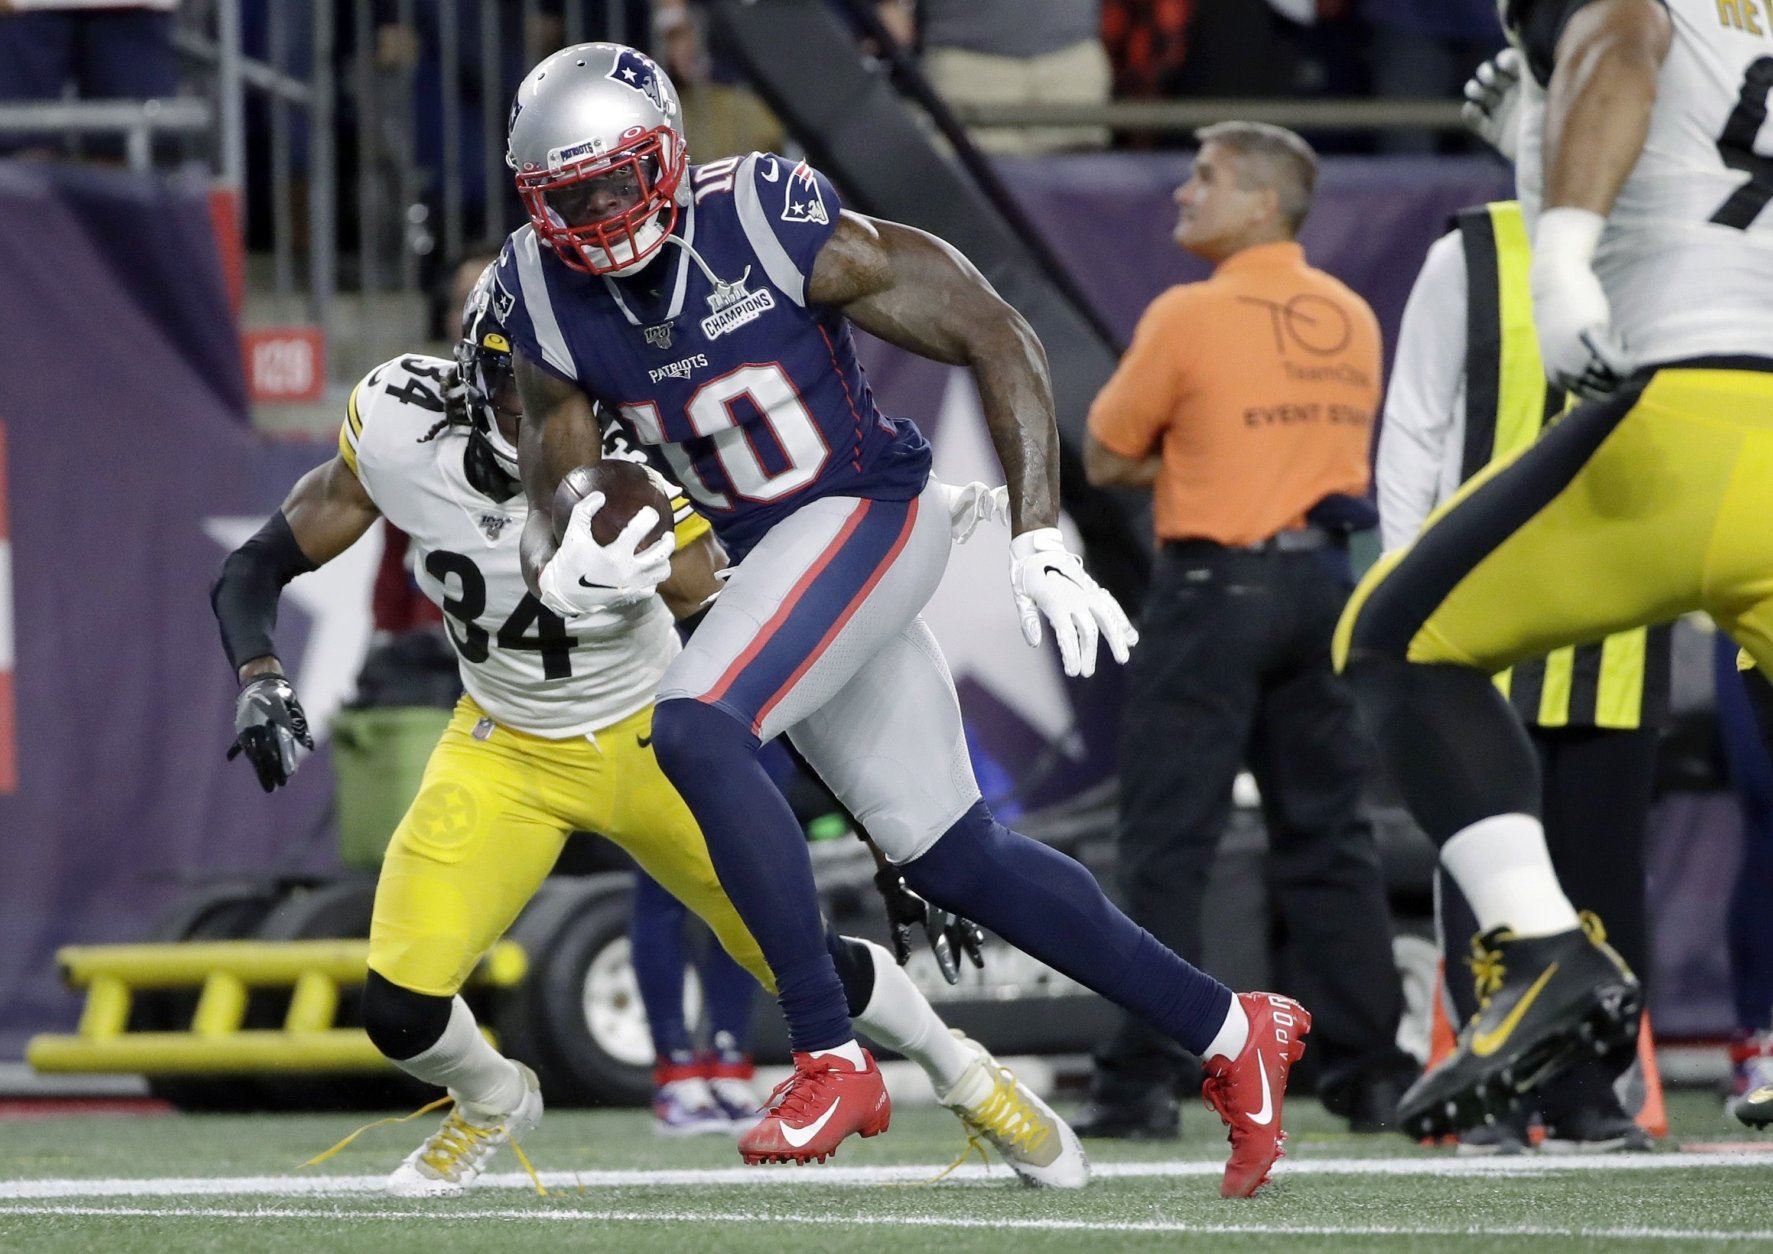 <p><b><i>Steelers 3</i></b><br />
<b><i>Patriots 33</i></b></p>
<p>Pittsburgh is now 1-6 at Gillette Stadium, so while losing to the Patriots may have been a foregone conclusion, failing to score a touchdown makes me worry that even though they&#8217;re finally free of drama, the Steelers may simply lack the playmakers to be the kind of team they thought they could be with Killer B&#8217;s.</p>
<p>Speaking of which … Antonio Brown joining the Patriots is just the kind of thing that makes me think 1) Brown&#8217;s meltdown was a calculated move to get to a contender and 2) I should have picked New England to win the Super Bowl. Is it too late to change <a href="https://wtop.com/gallery/nfl/2019-nfl-playoff-predictions/" target="_blank" rel="noopener">my pick</a>?</p>
